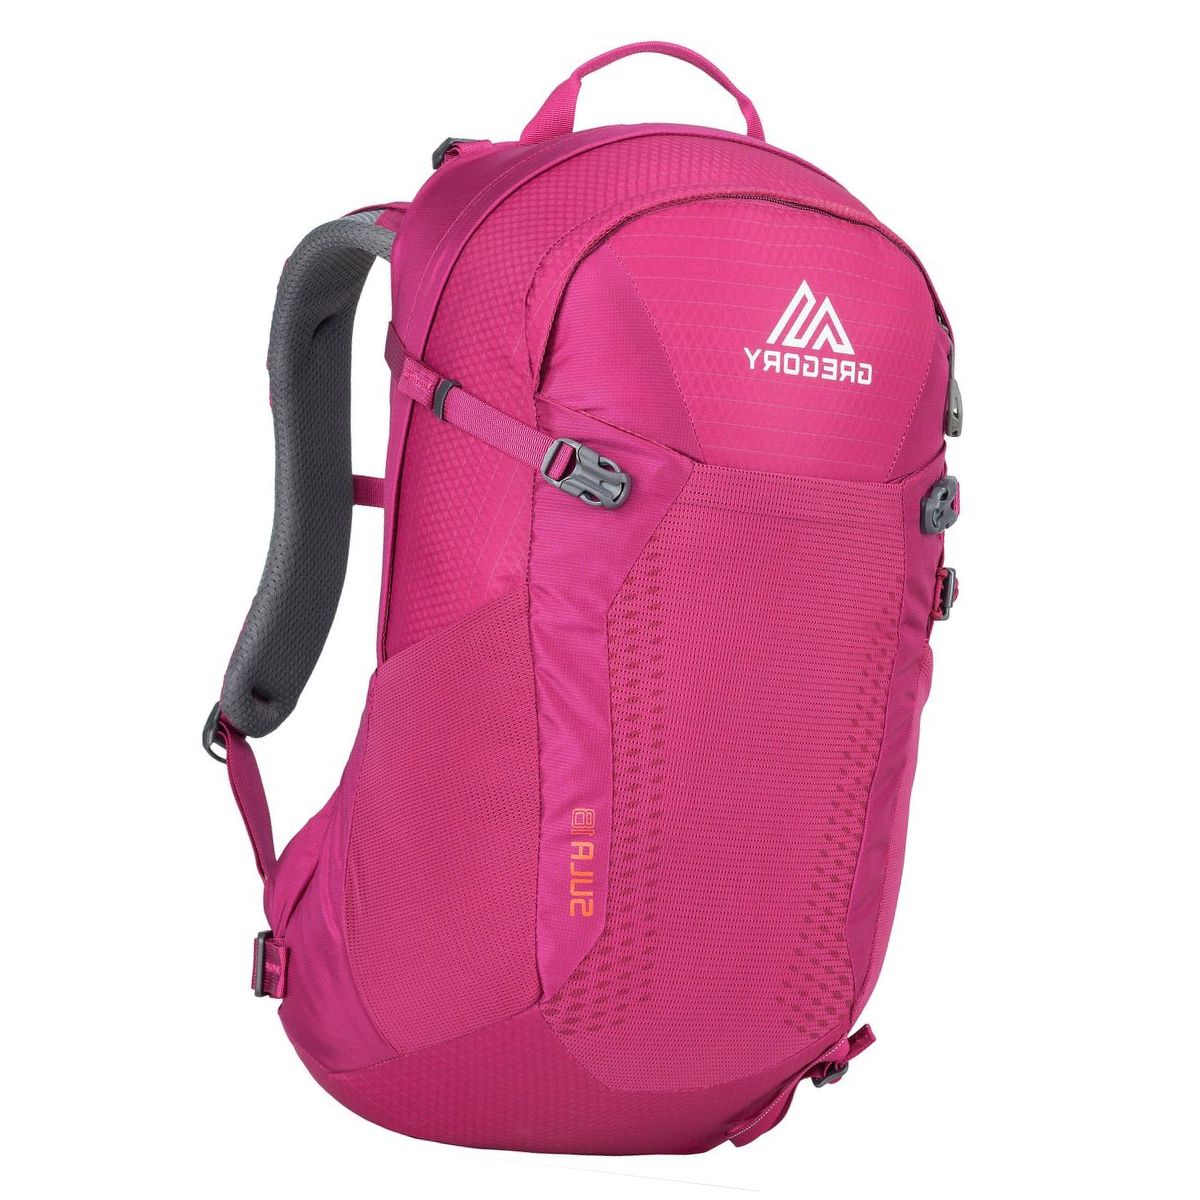 Gregory Sula 18L Backpack - Women's